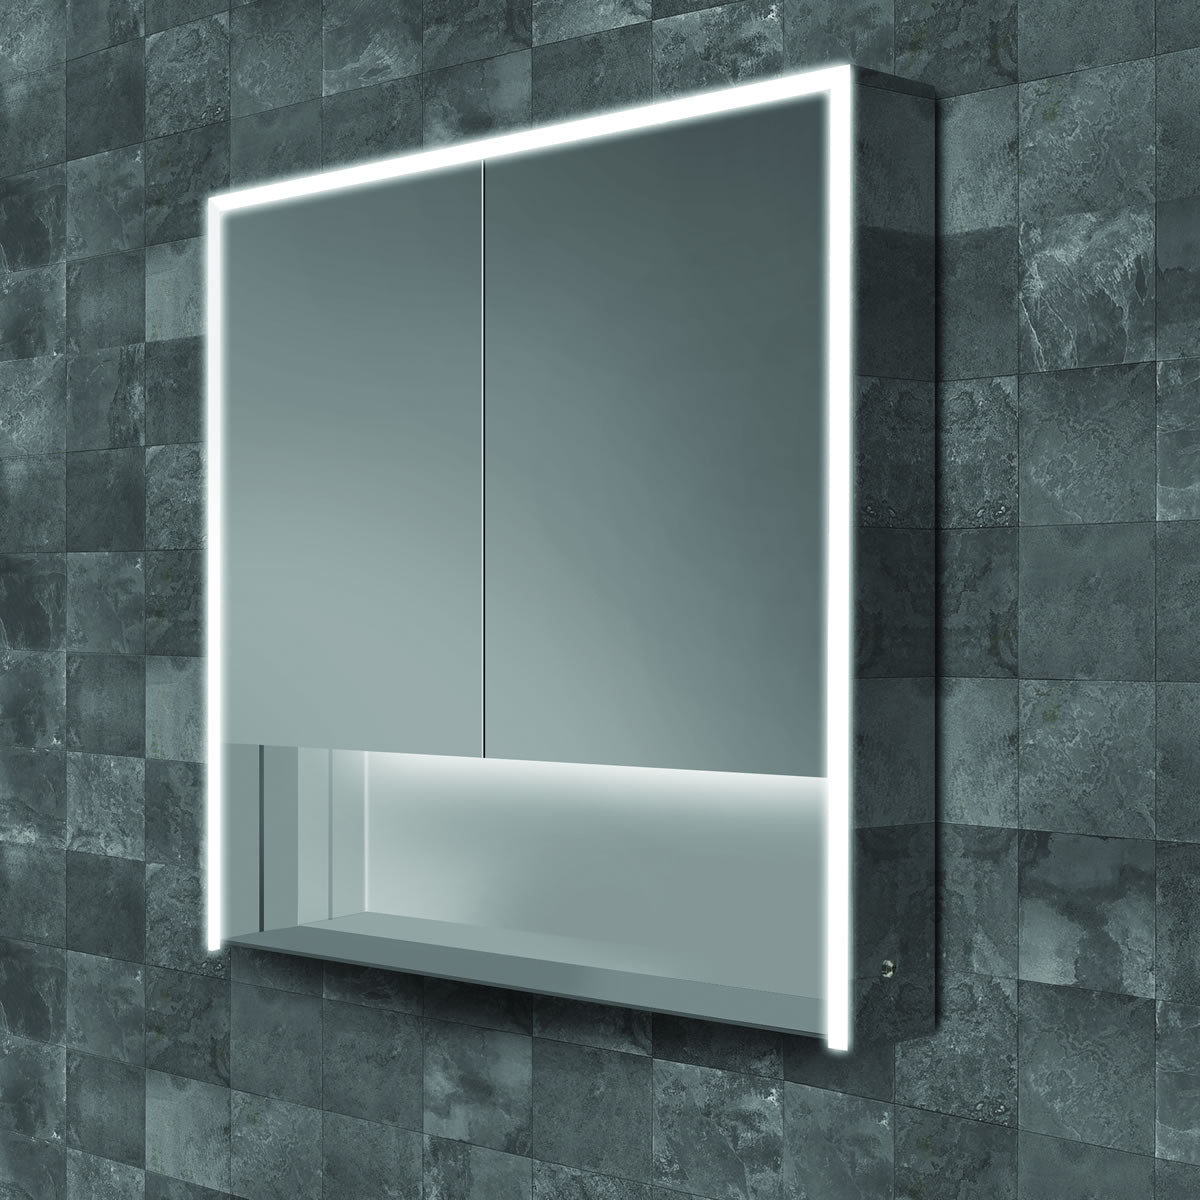 Mirror Cabinets with Demister Pads